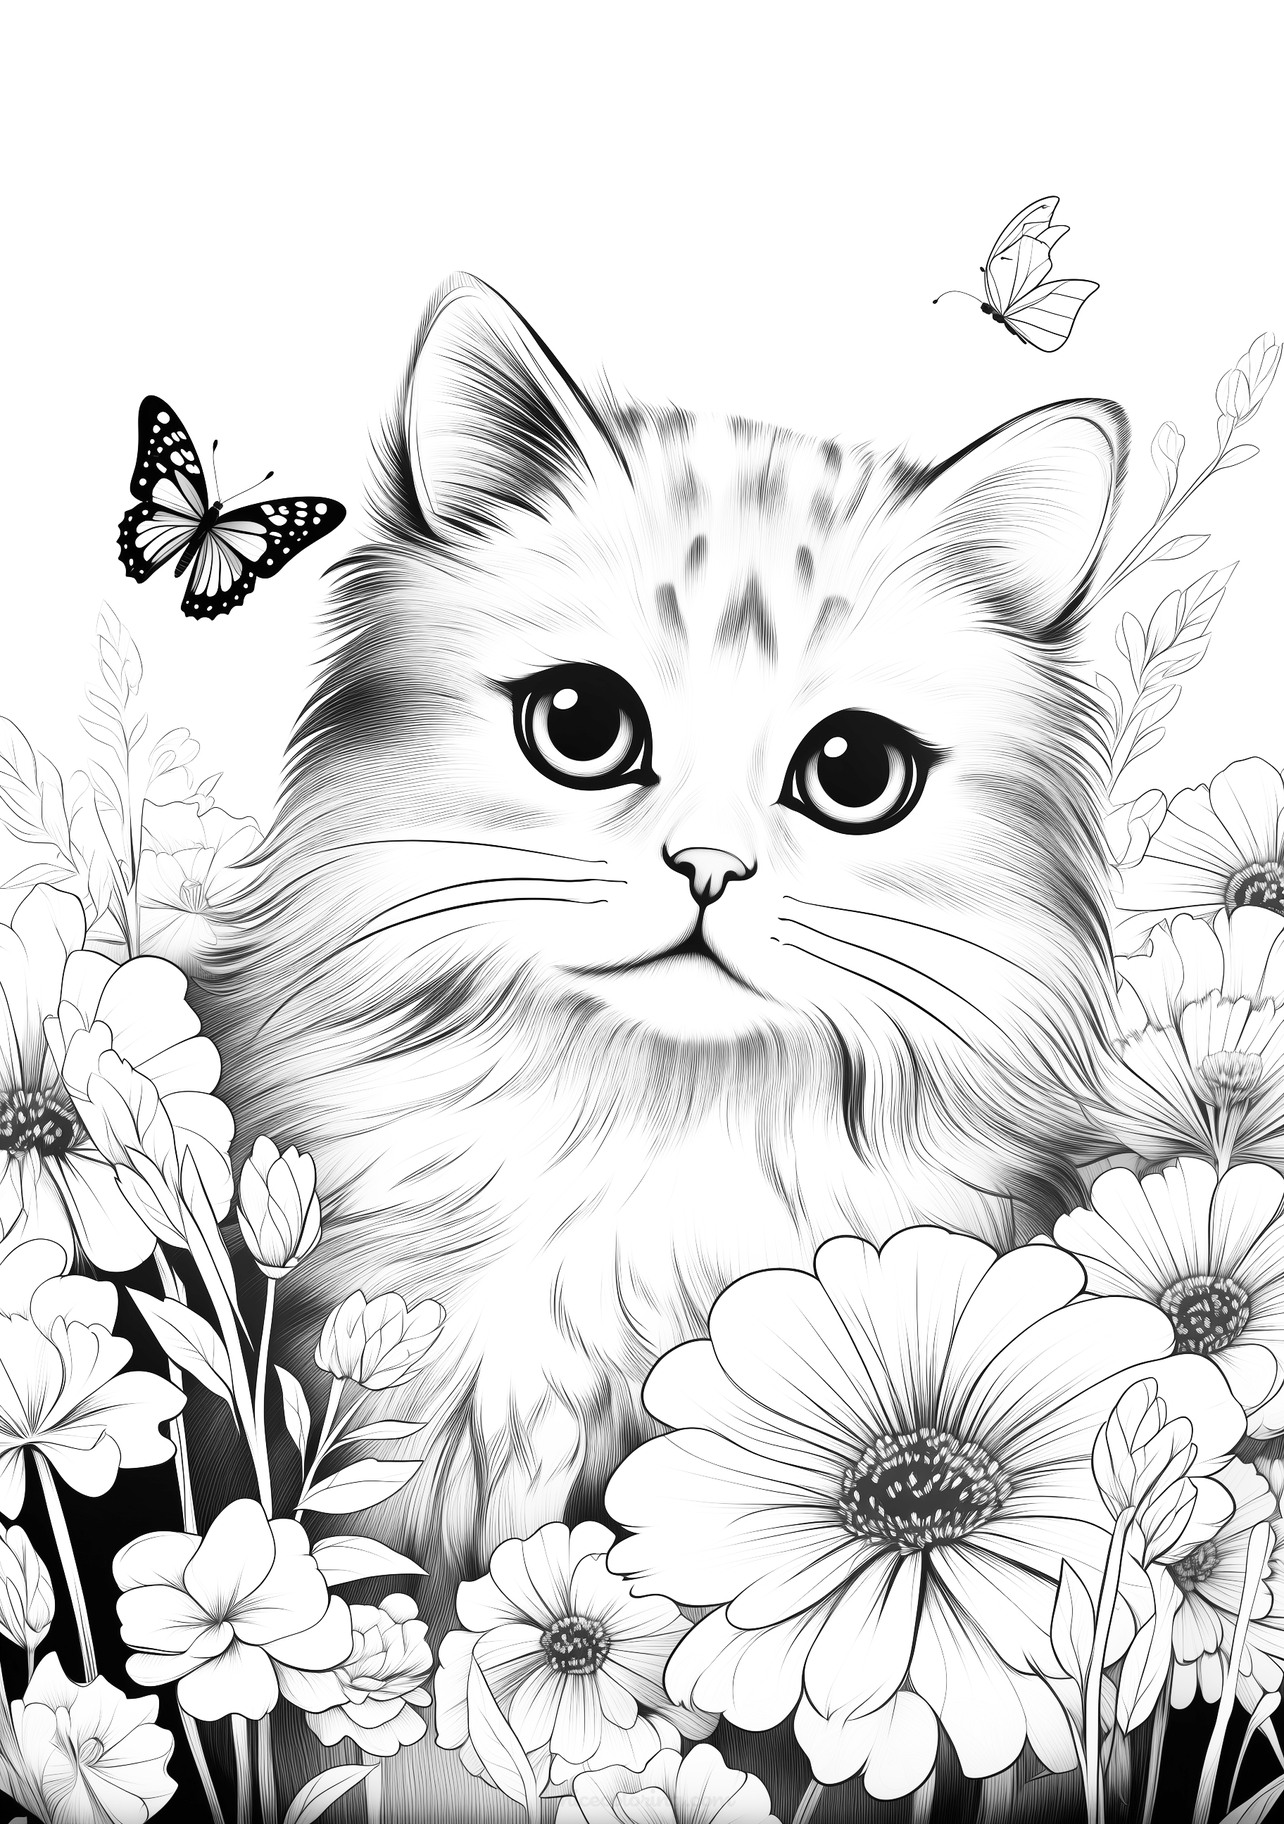 Cat 🐈‍⬛ and butterfly 🦋 : r/drawing